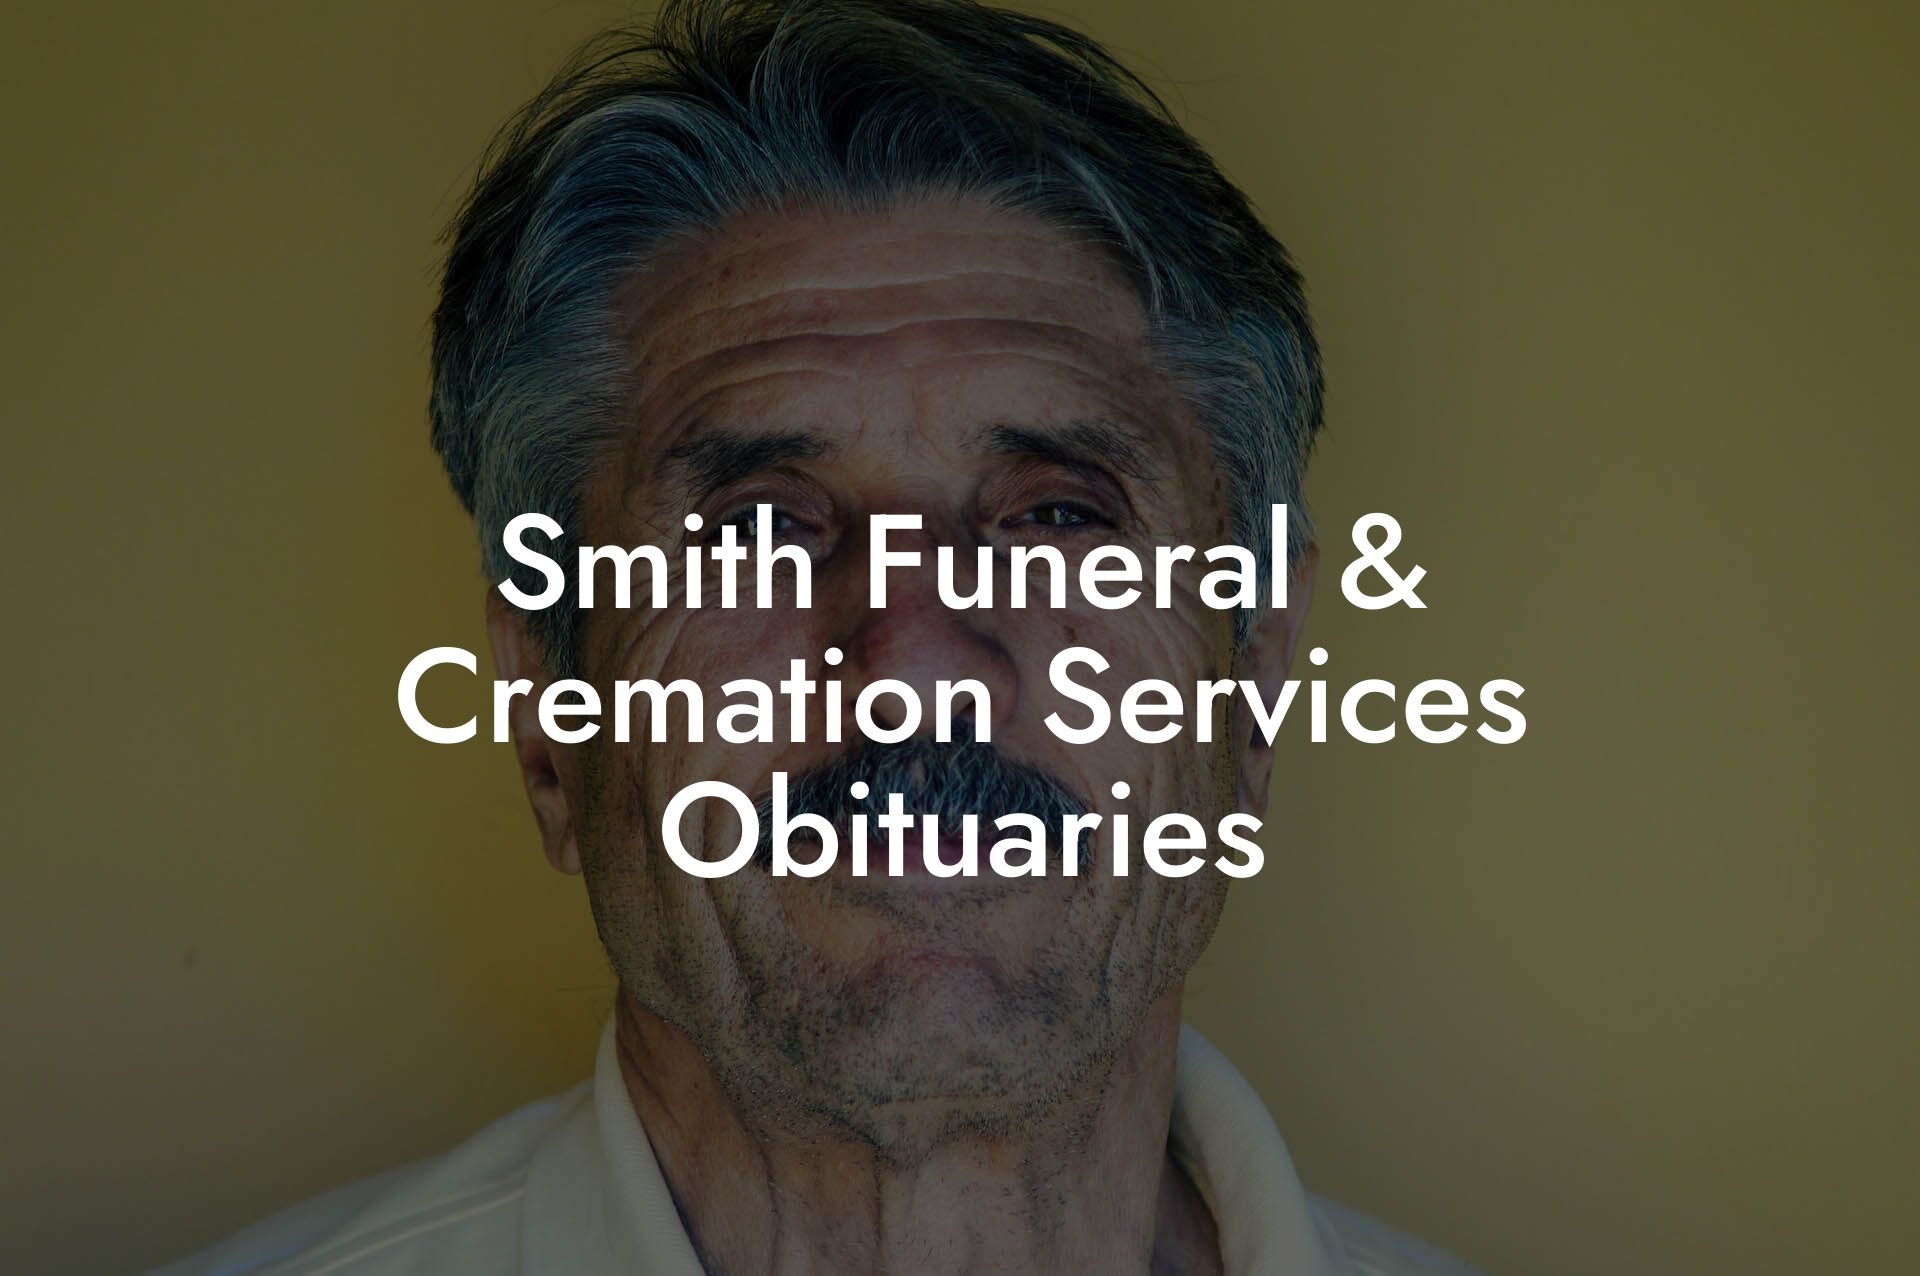 Smith Funeral & Cremation Services Obituaries